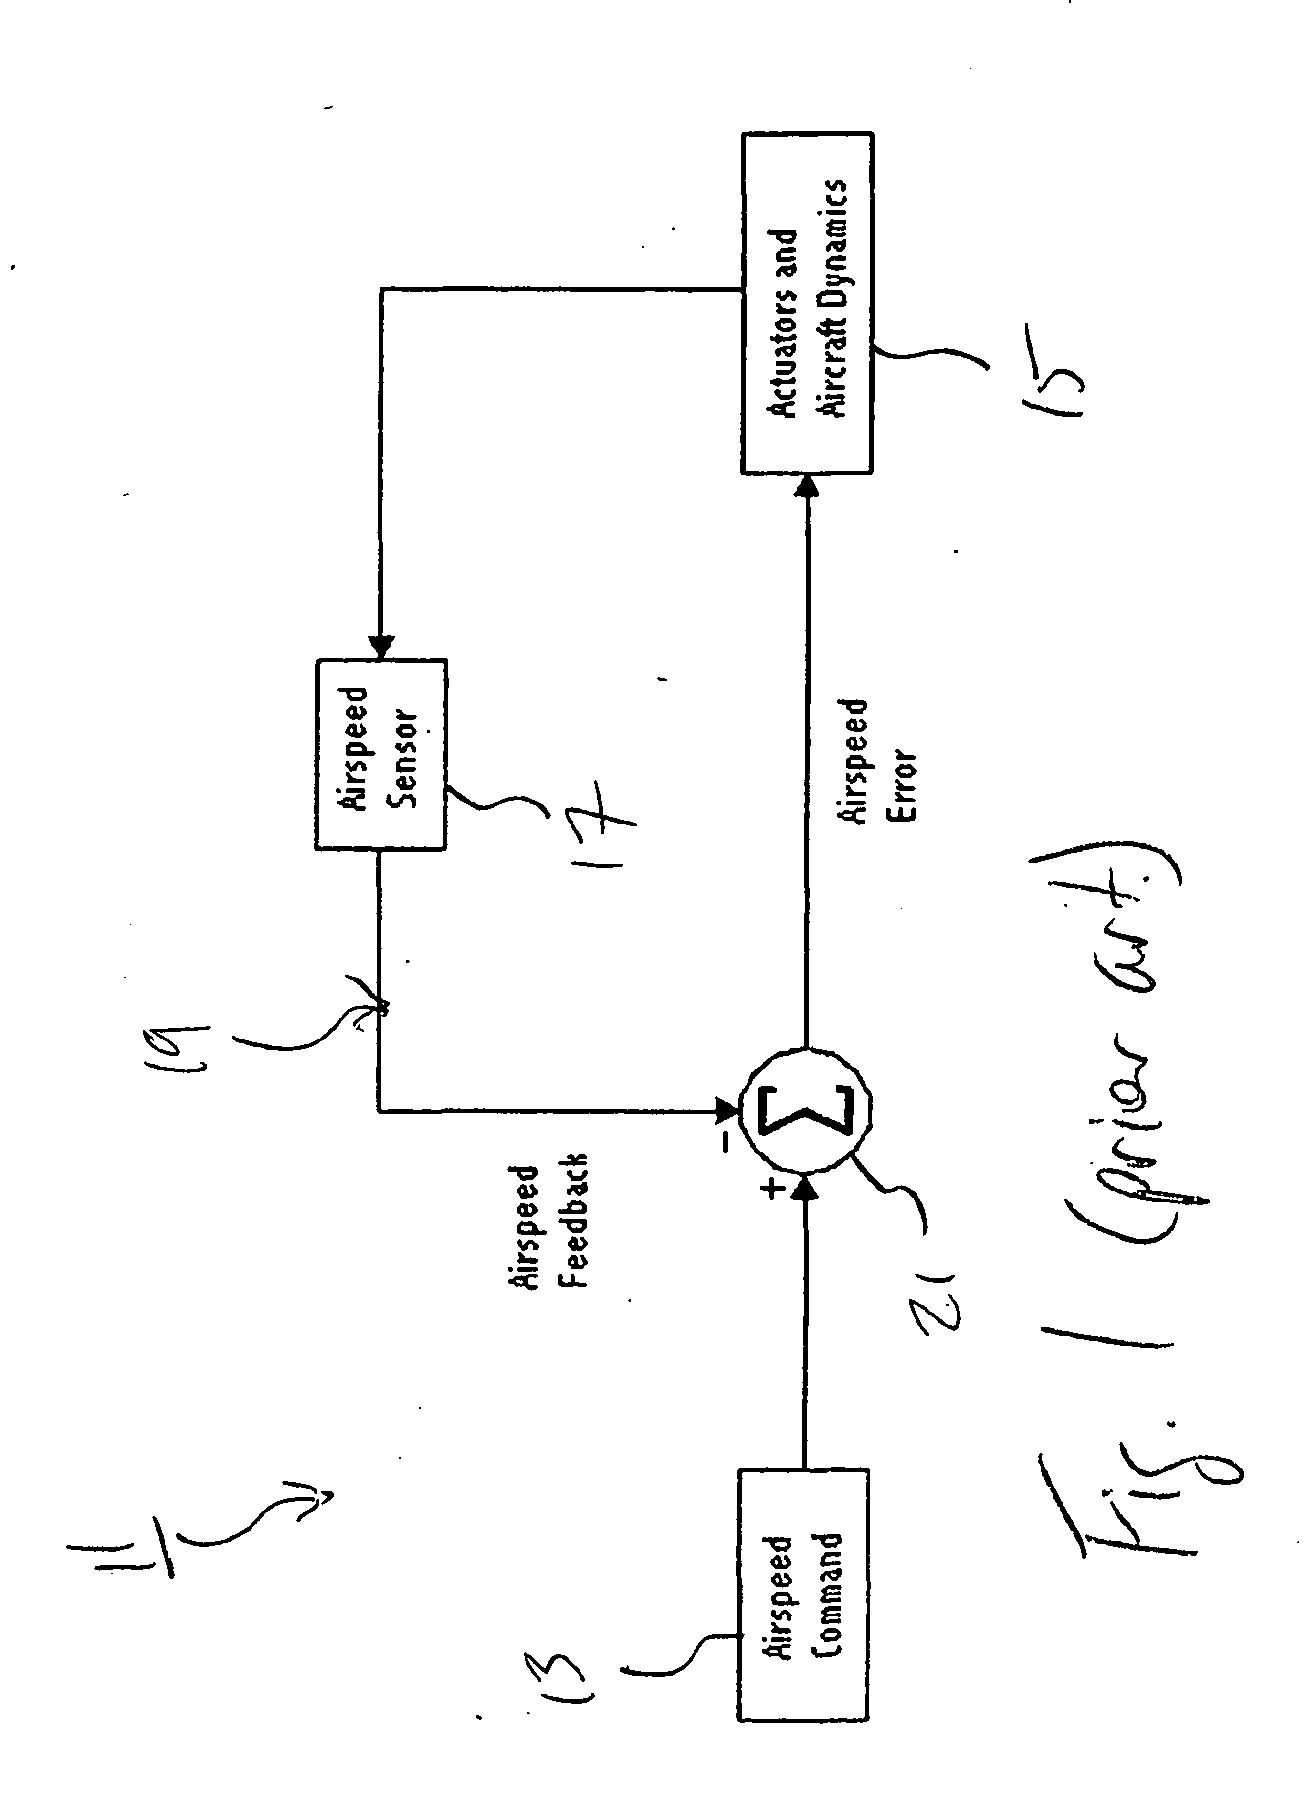 Automatic Velocity Control System For Aircraft